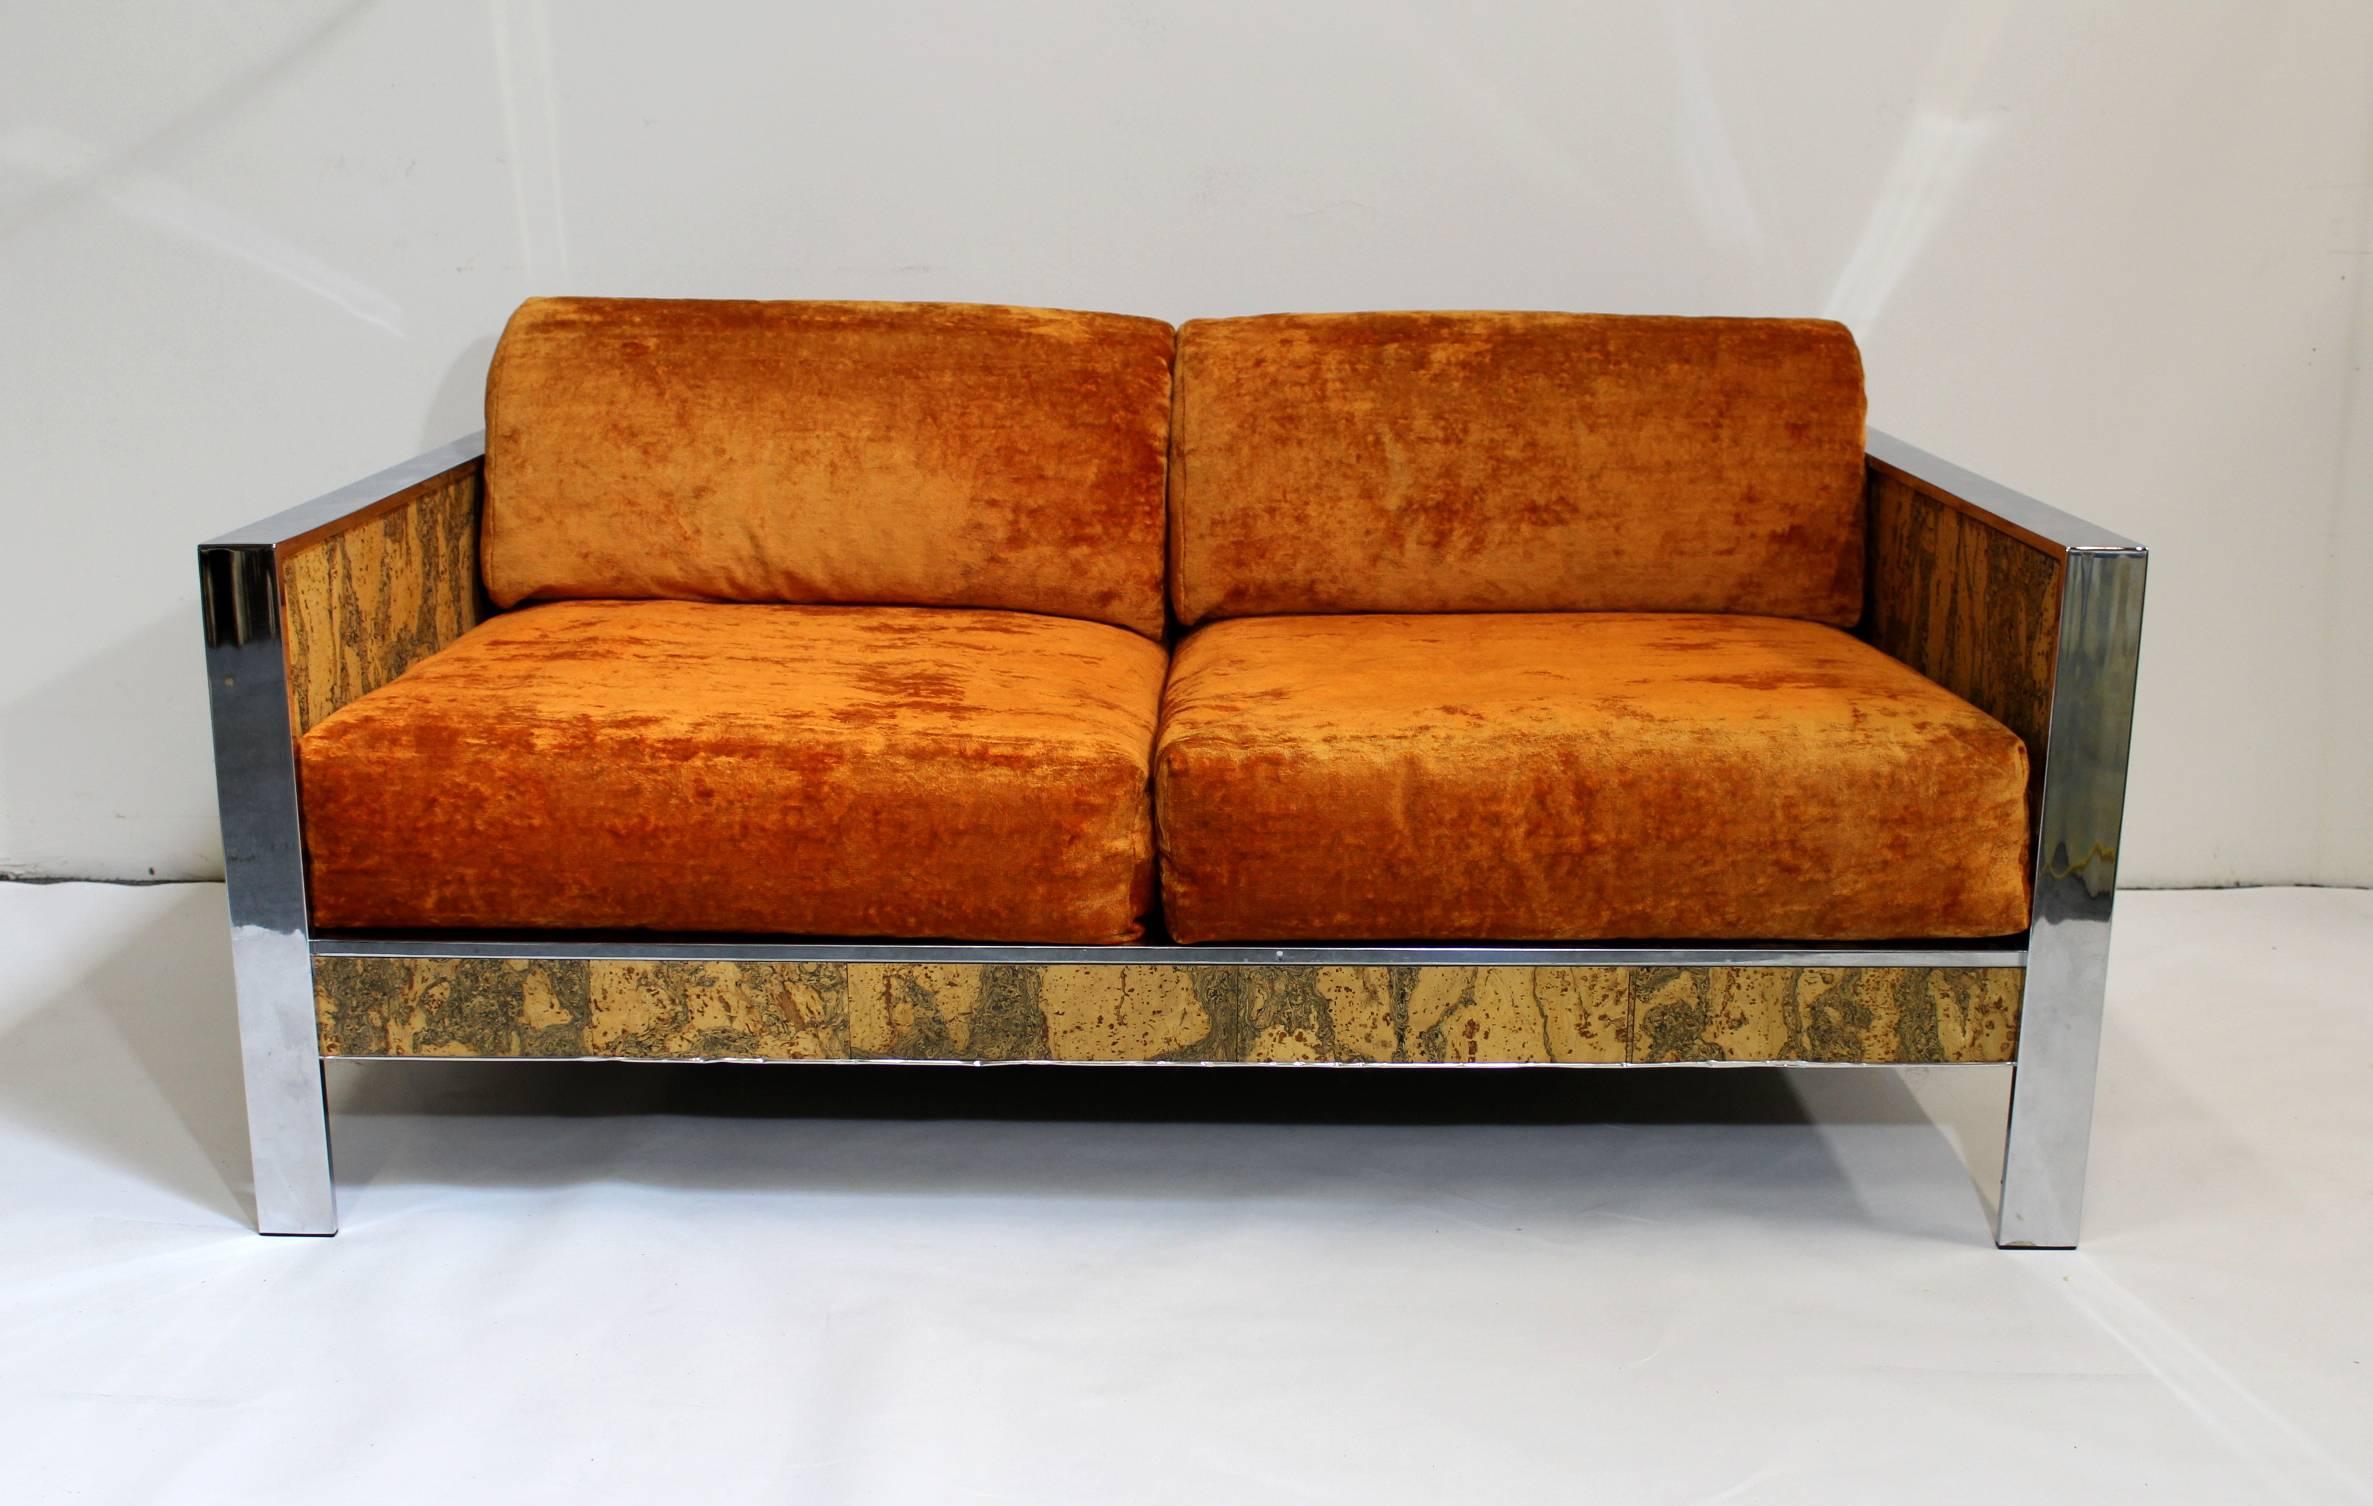 1970s Milo Baughman style sofa with beautiful cork and chrome body and amazing orange crushed velvet cushions! Incredible decorative piece that would really set off a room.
     